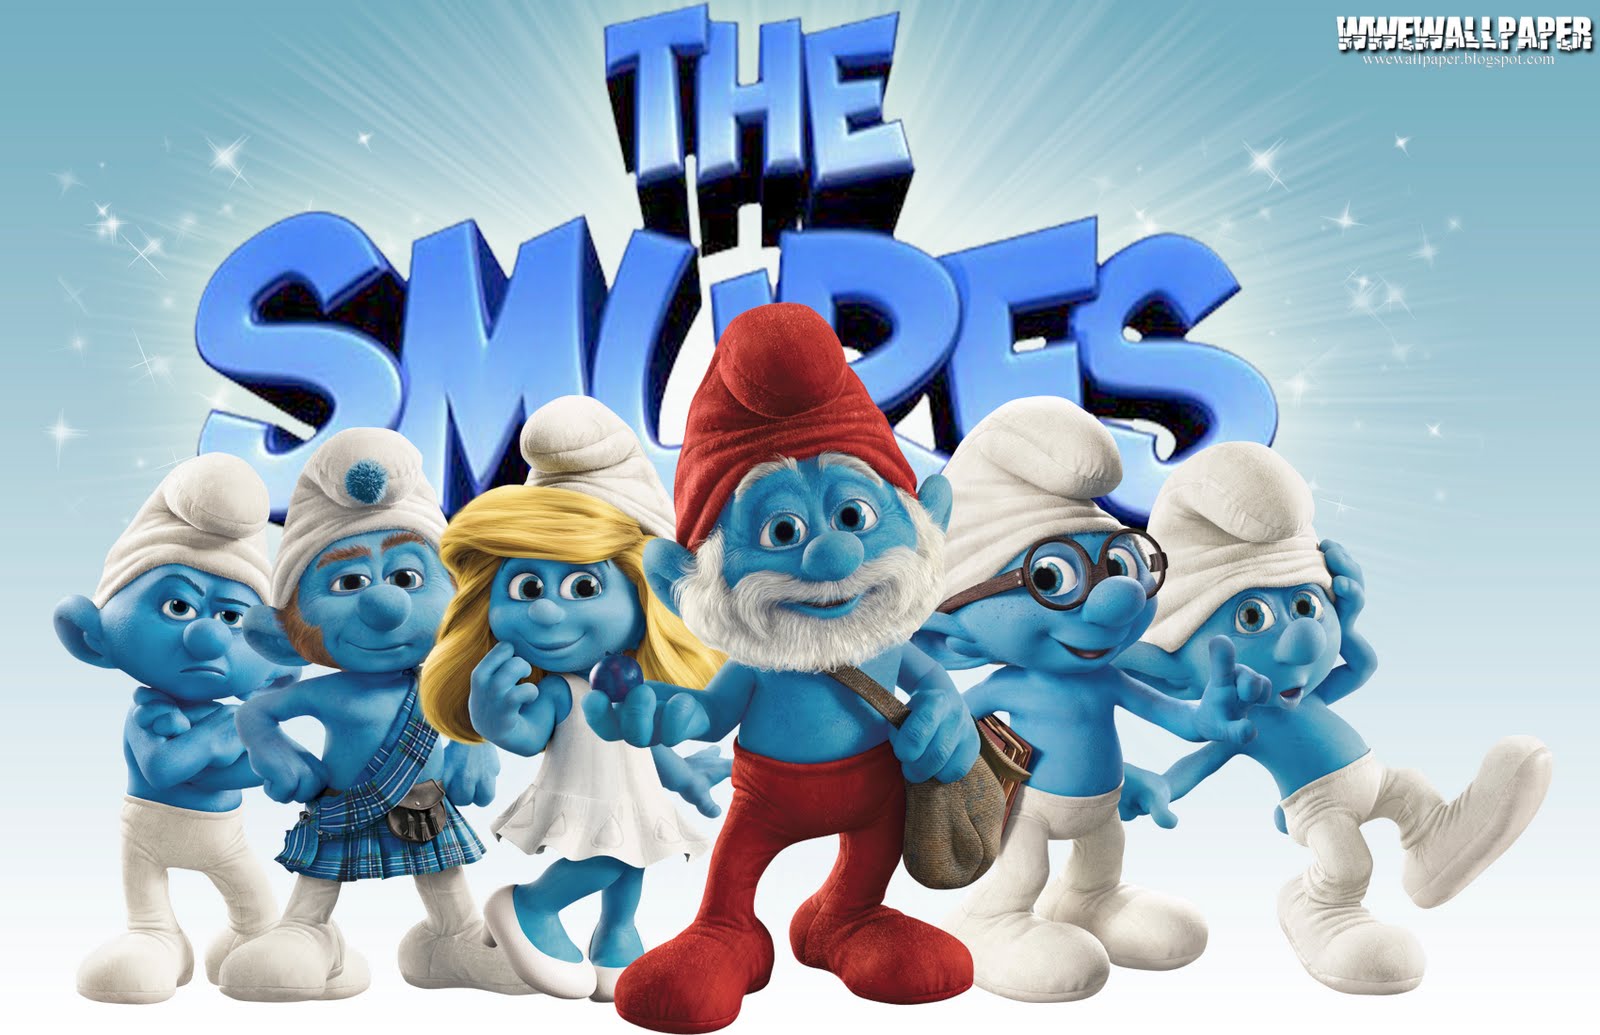 Smurf Wallpaper For iPhone HD Smurfs